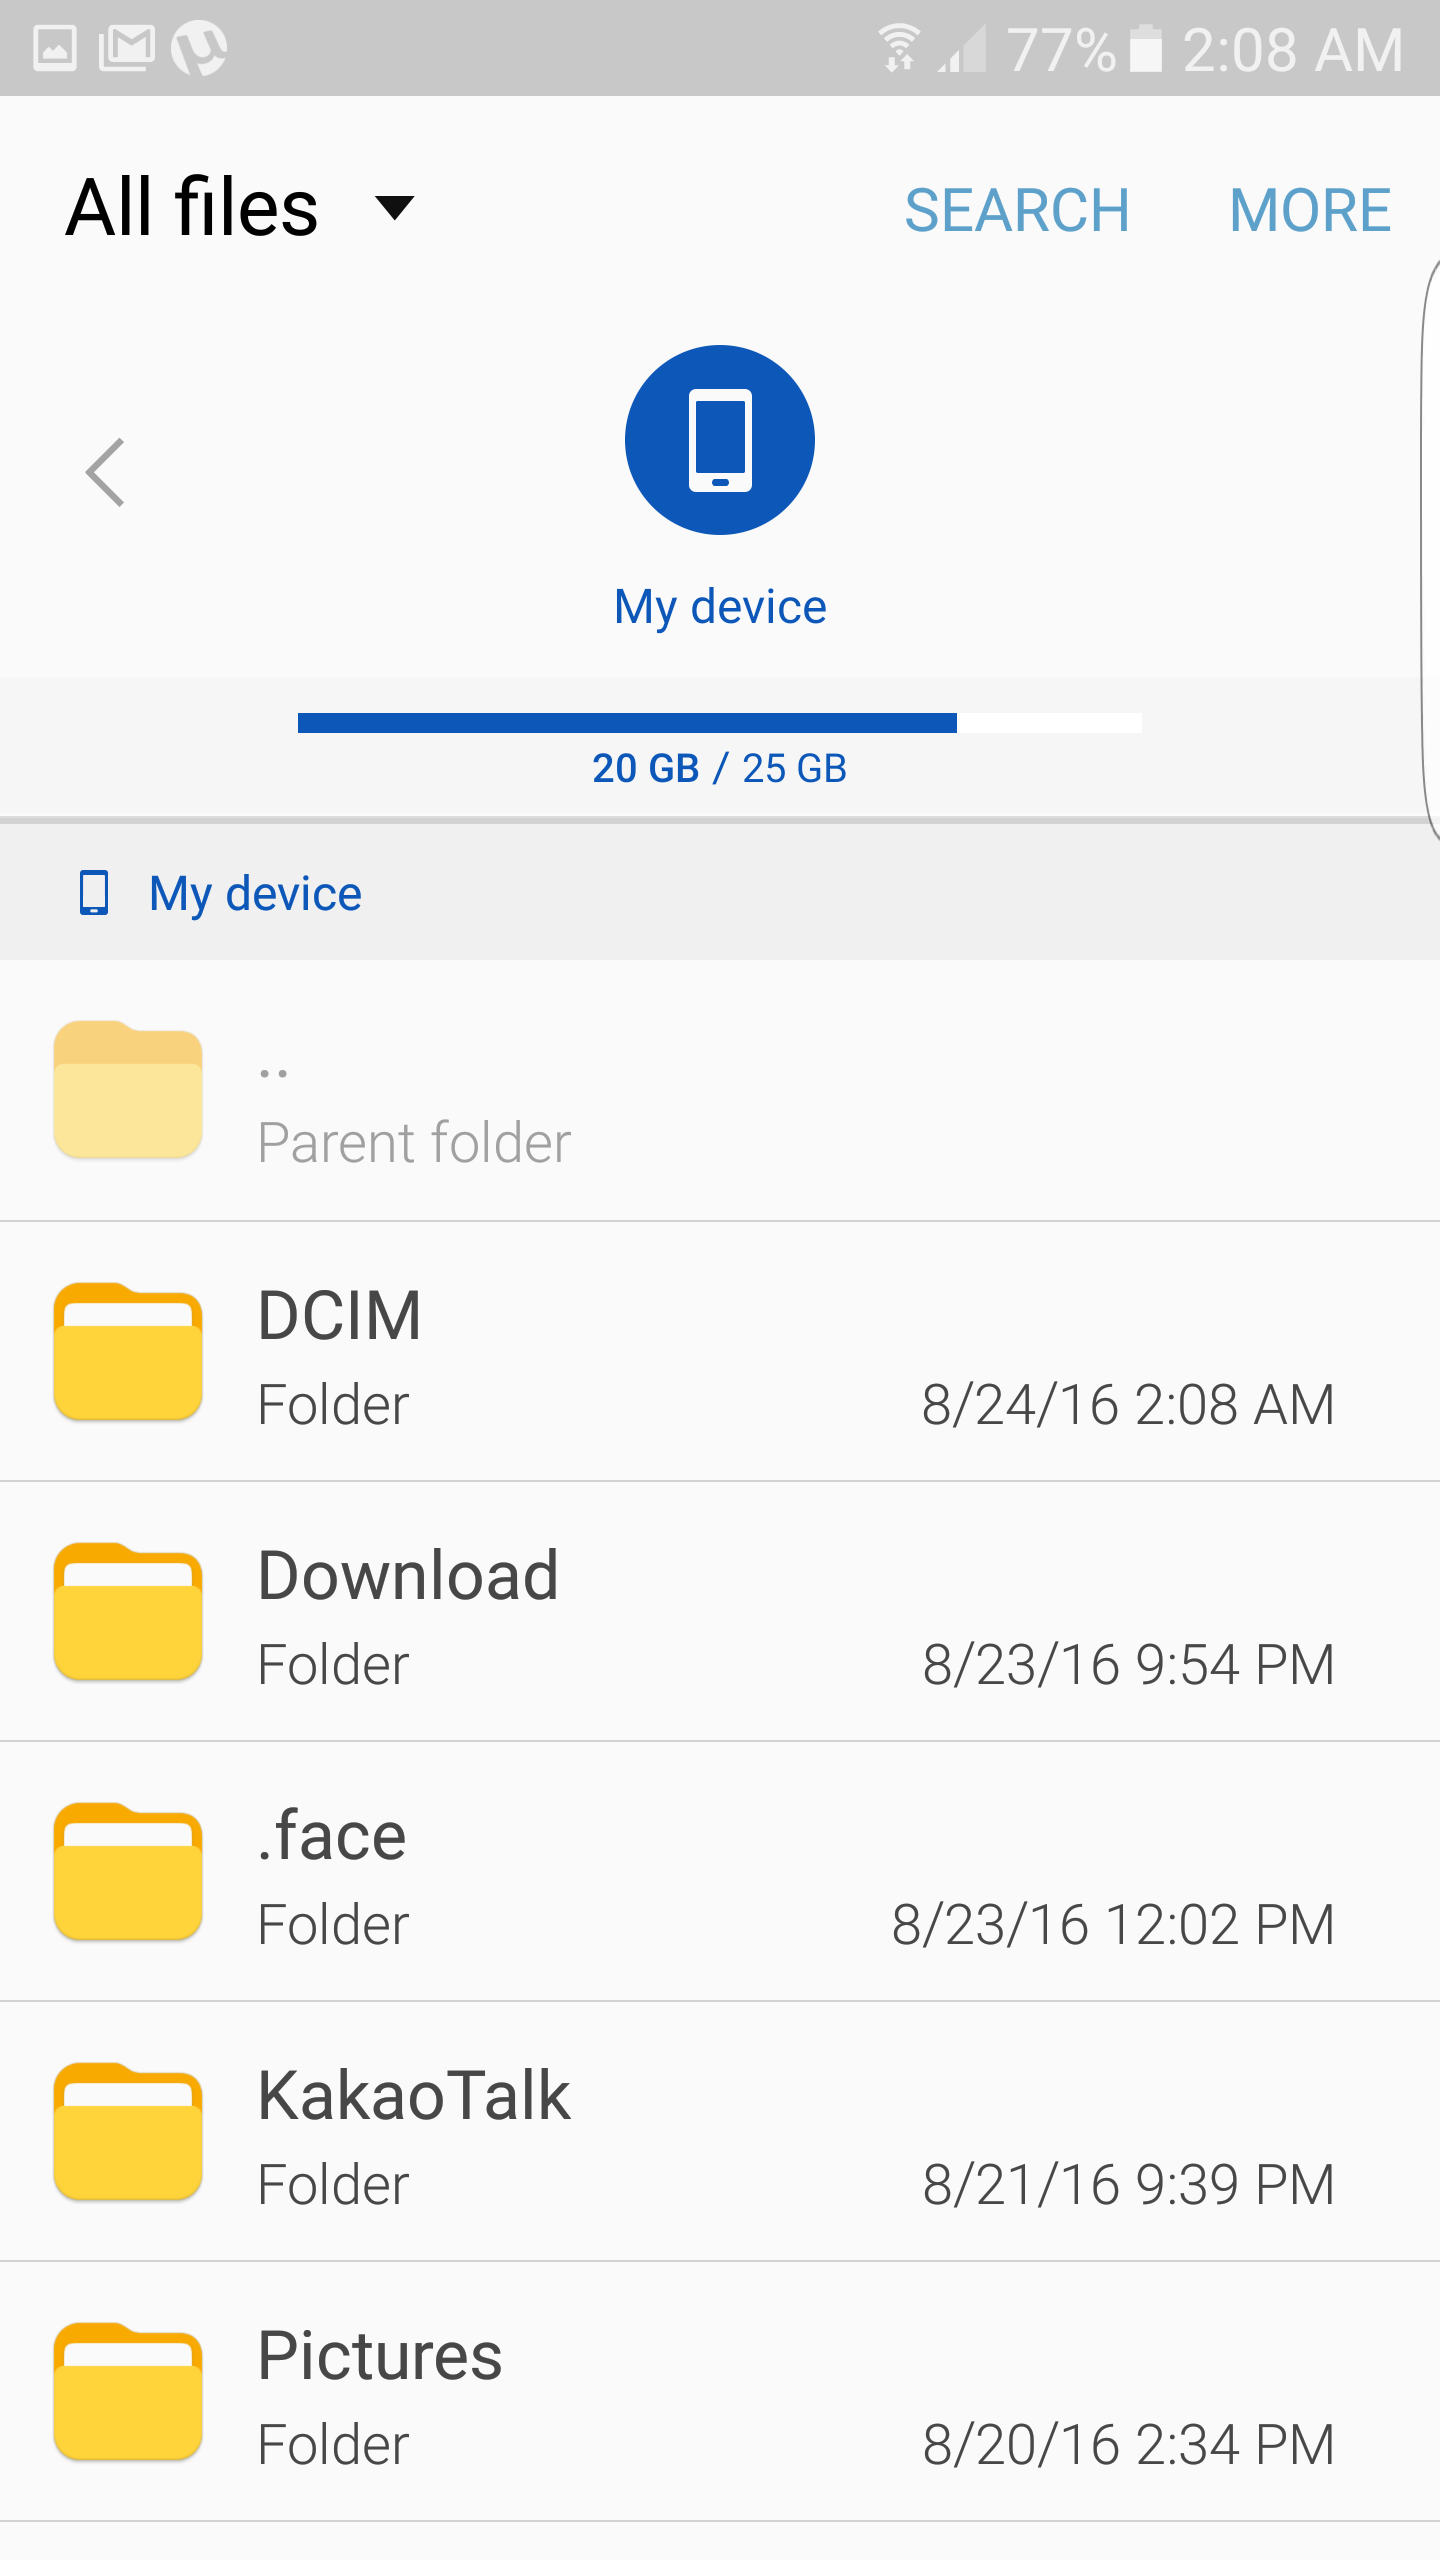 Samsung Cloud Together is a great new app to access cloud storage and